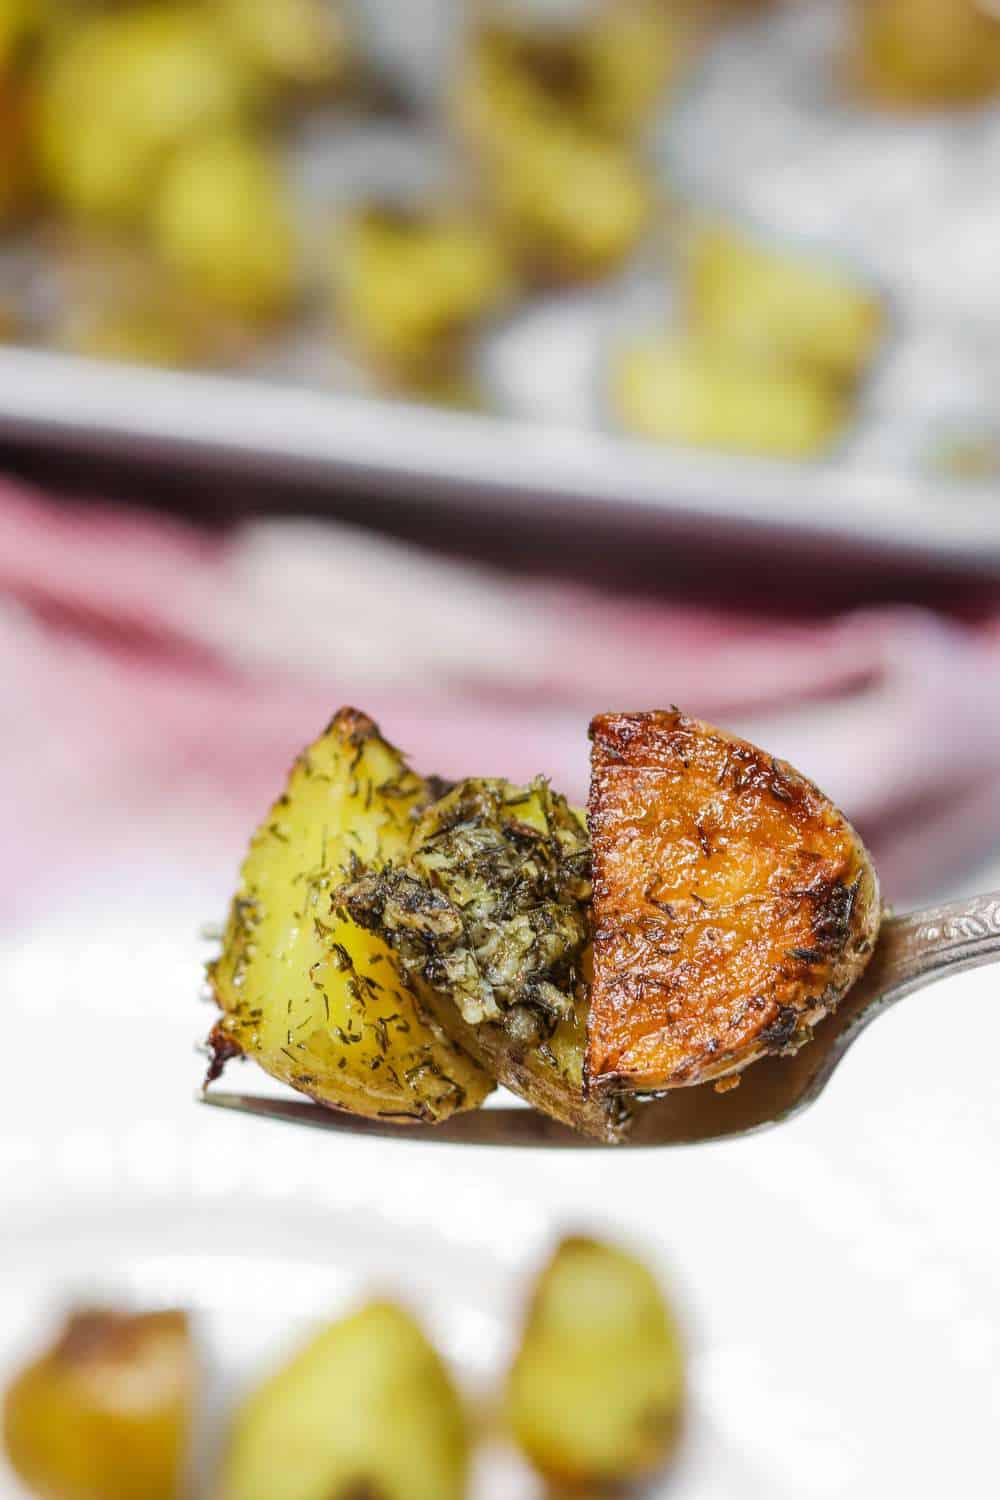 Dill & Garlic Roasted Potatoes on fork